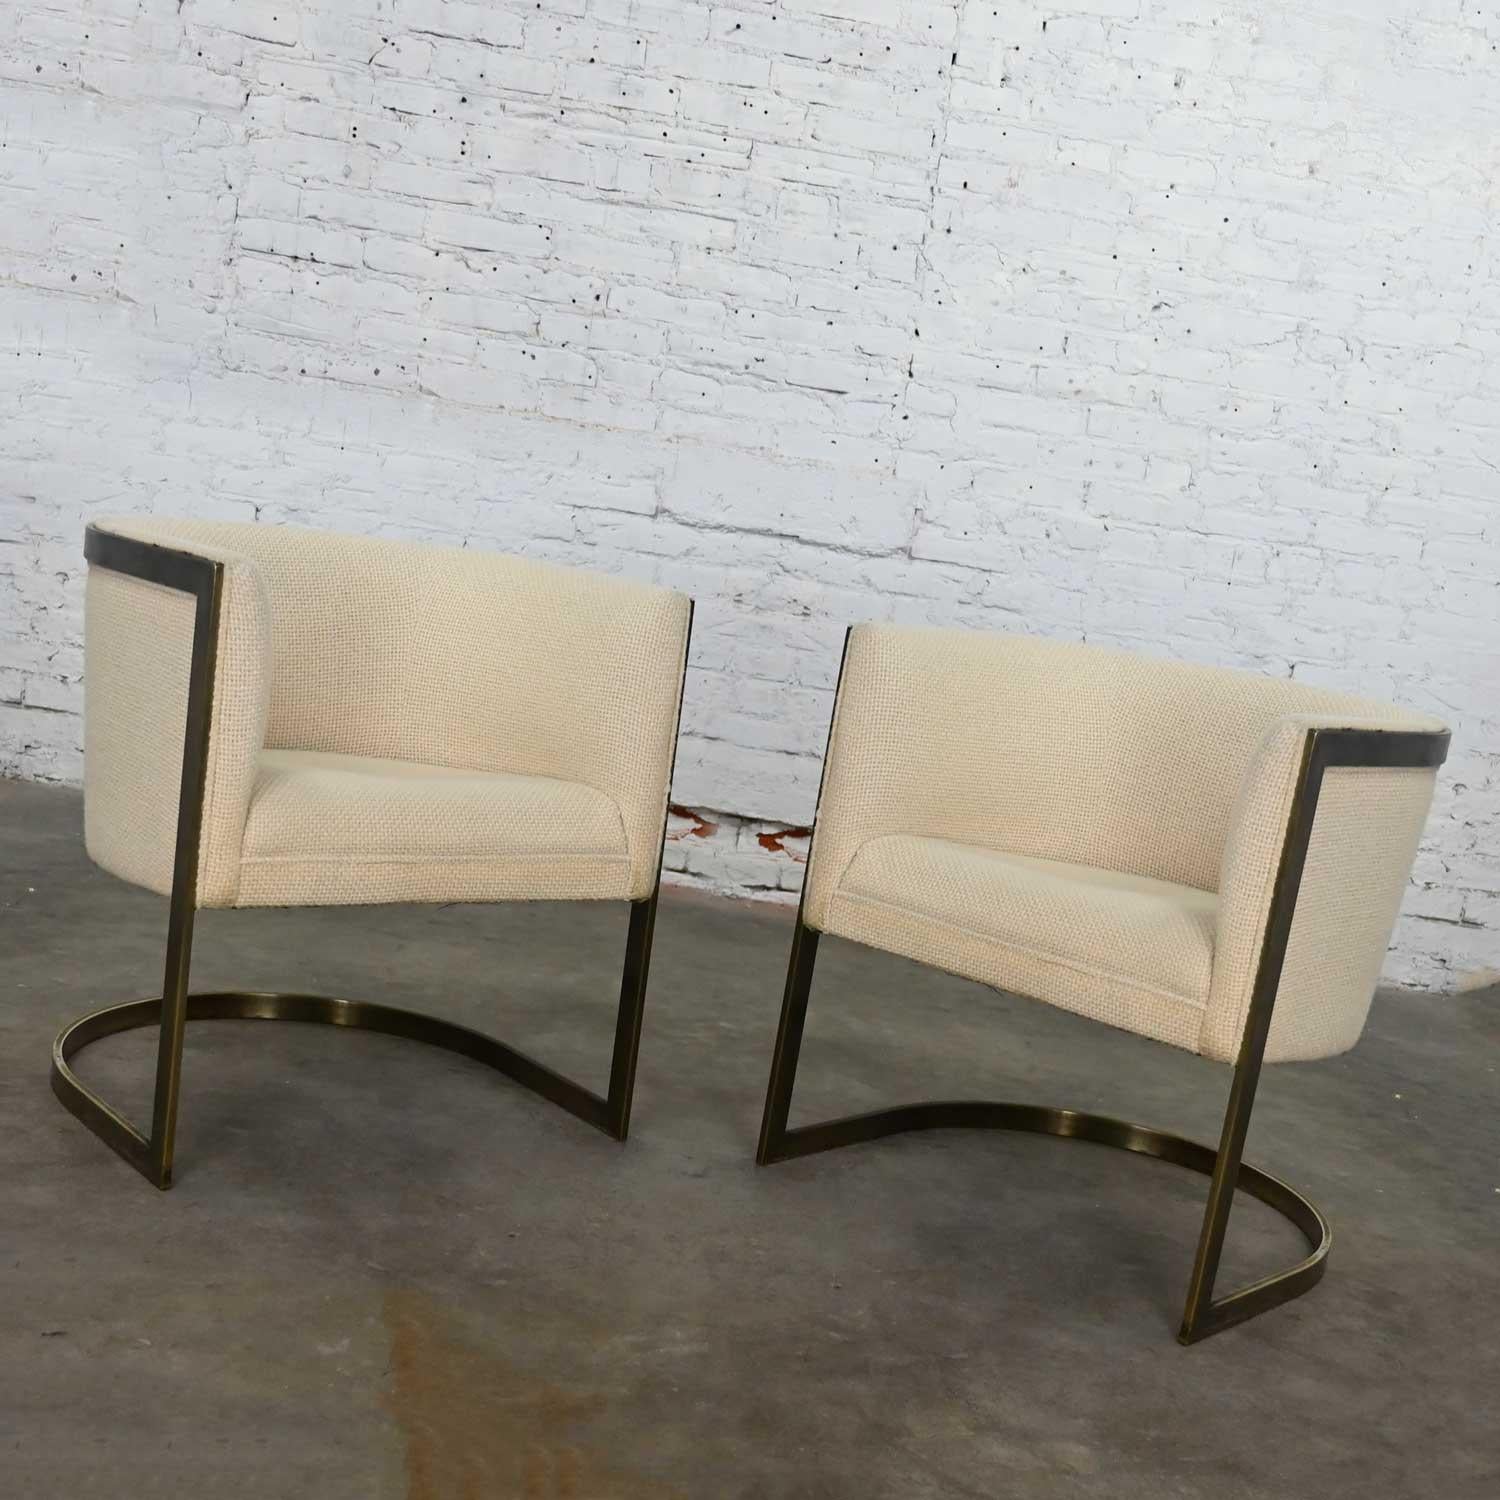 Metropolitan Furn Modern White & Antique Brass Plate Tub Chairs by Jules Heumann In Good Condition For Sale In Topeka, KS